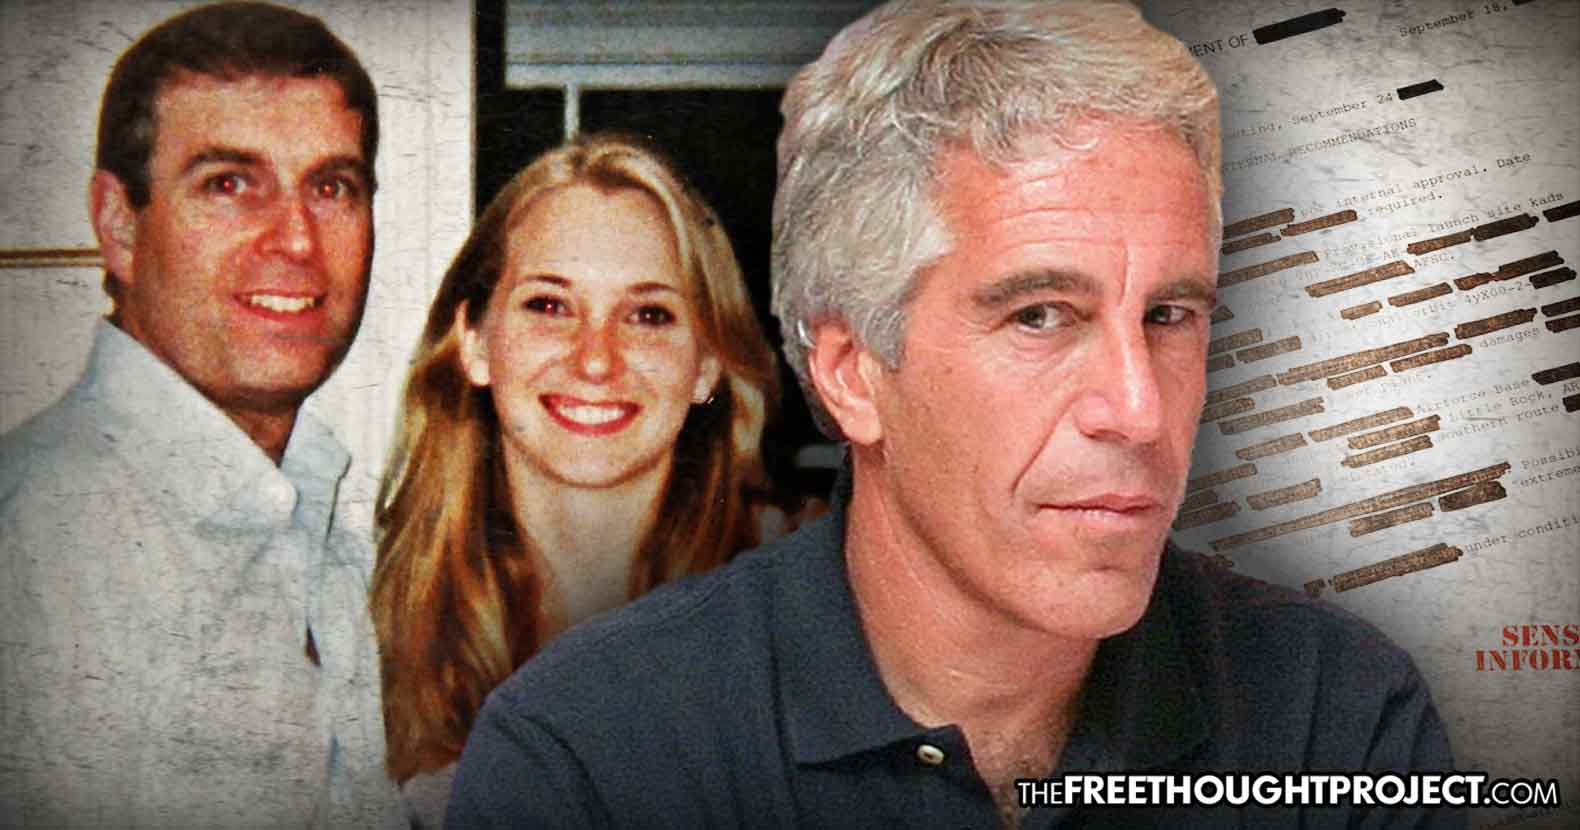 Feds to Unseal Epstein Documents Revealing Scope of Billionaire's Int'l Child Sex Trafficking Ring